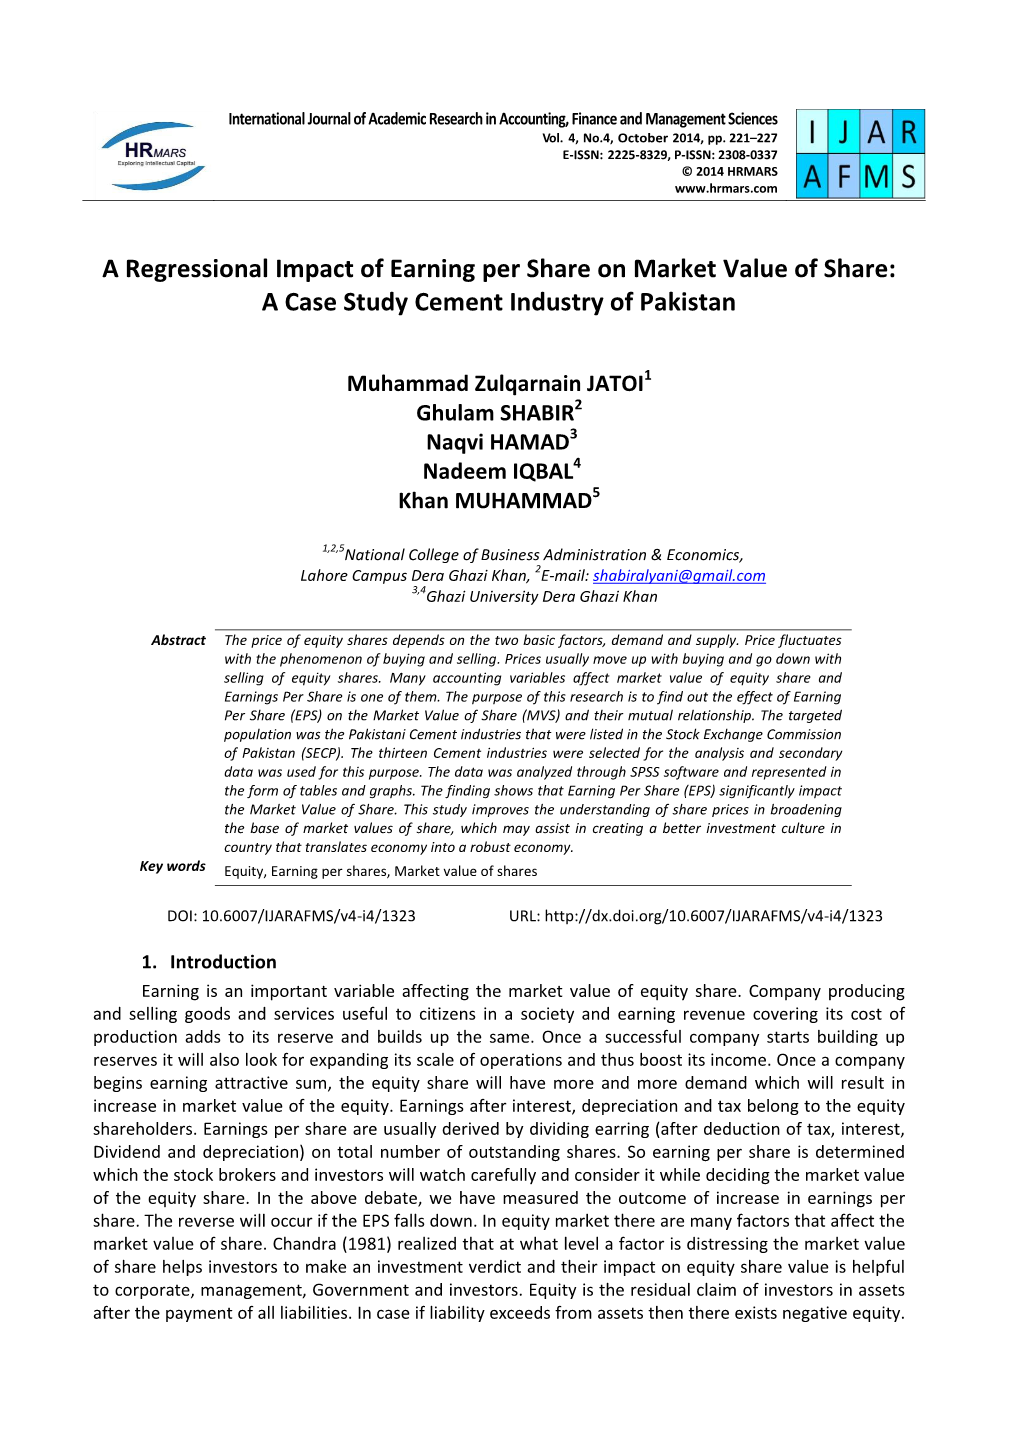 A Regressional Impact of Earning Per Share on Market Value of Share: a Case Study Cement Industry of Pakistan